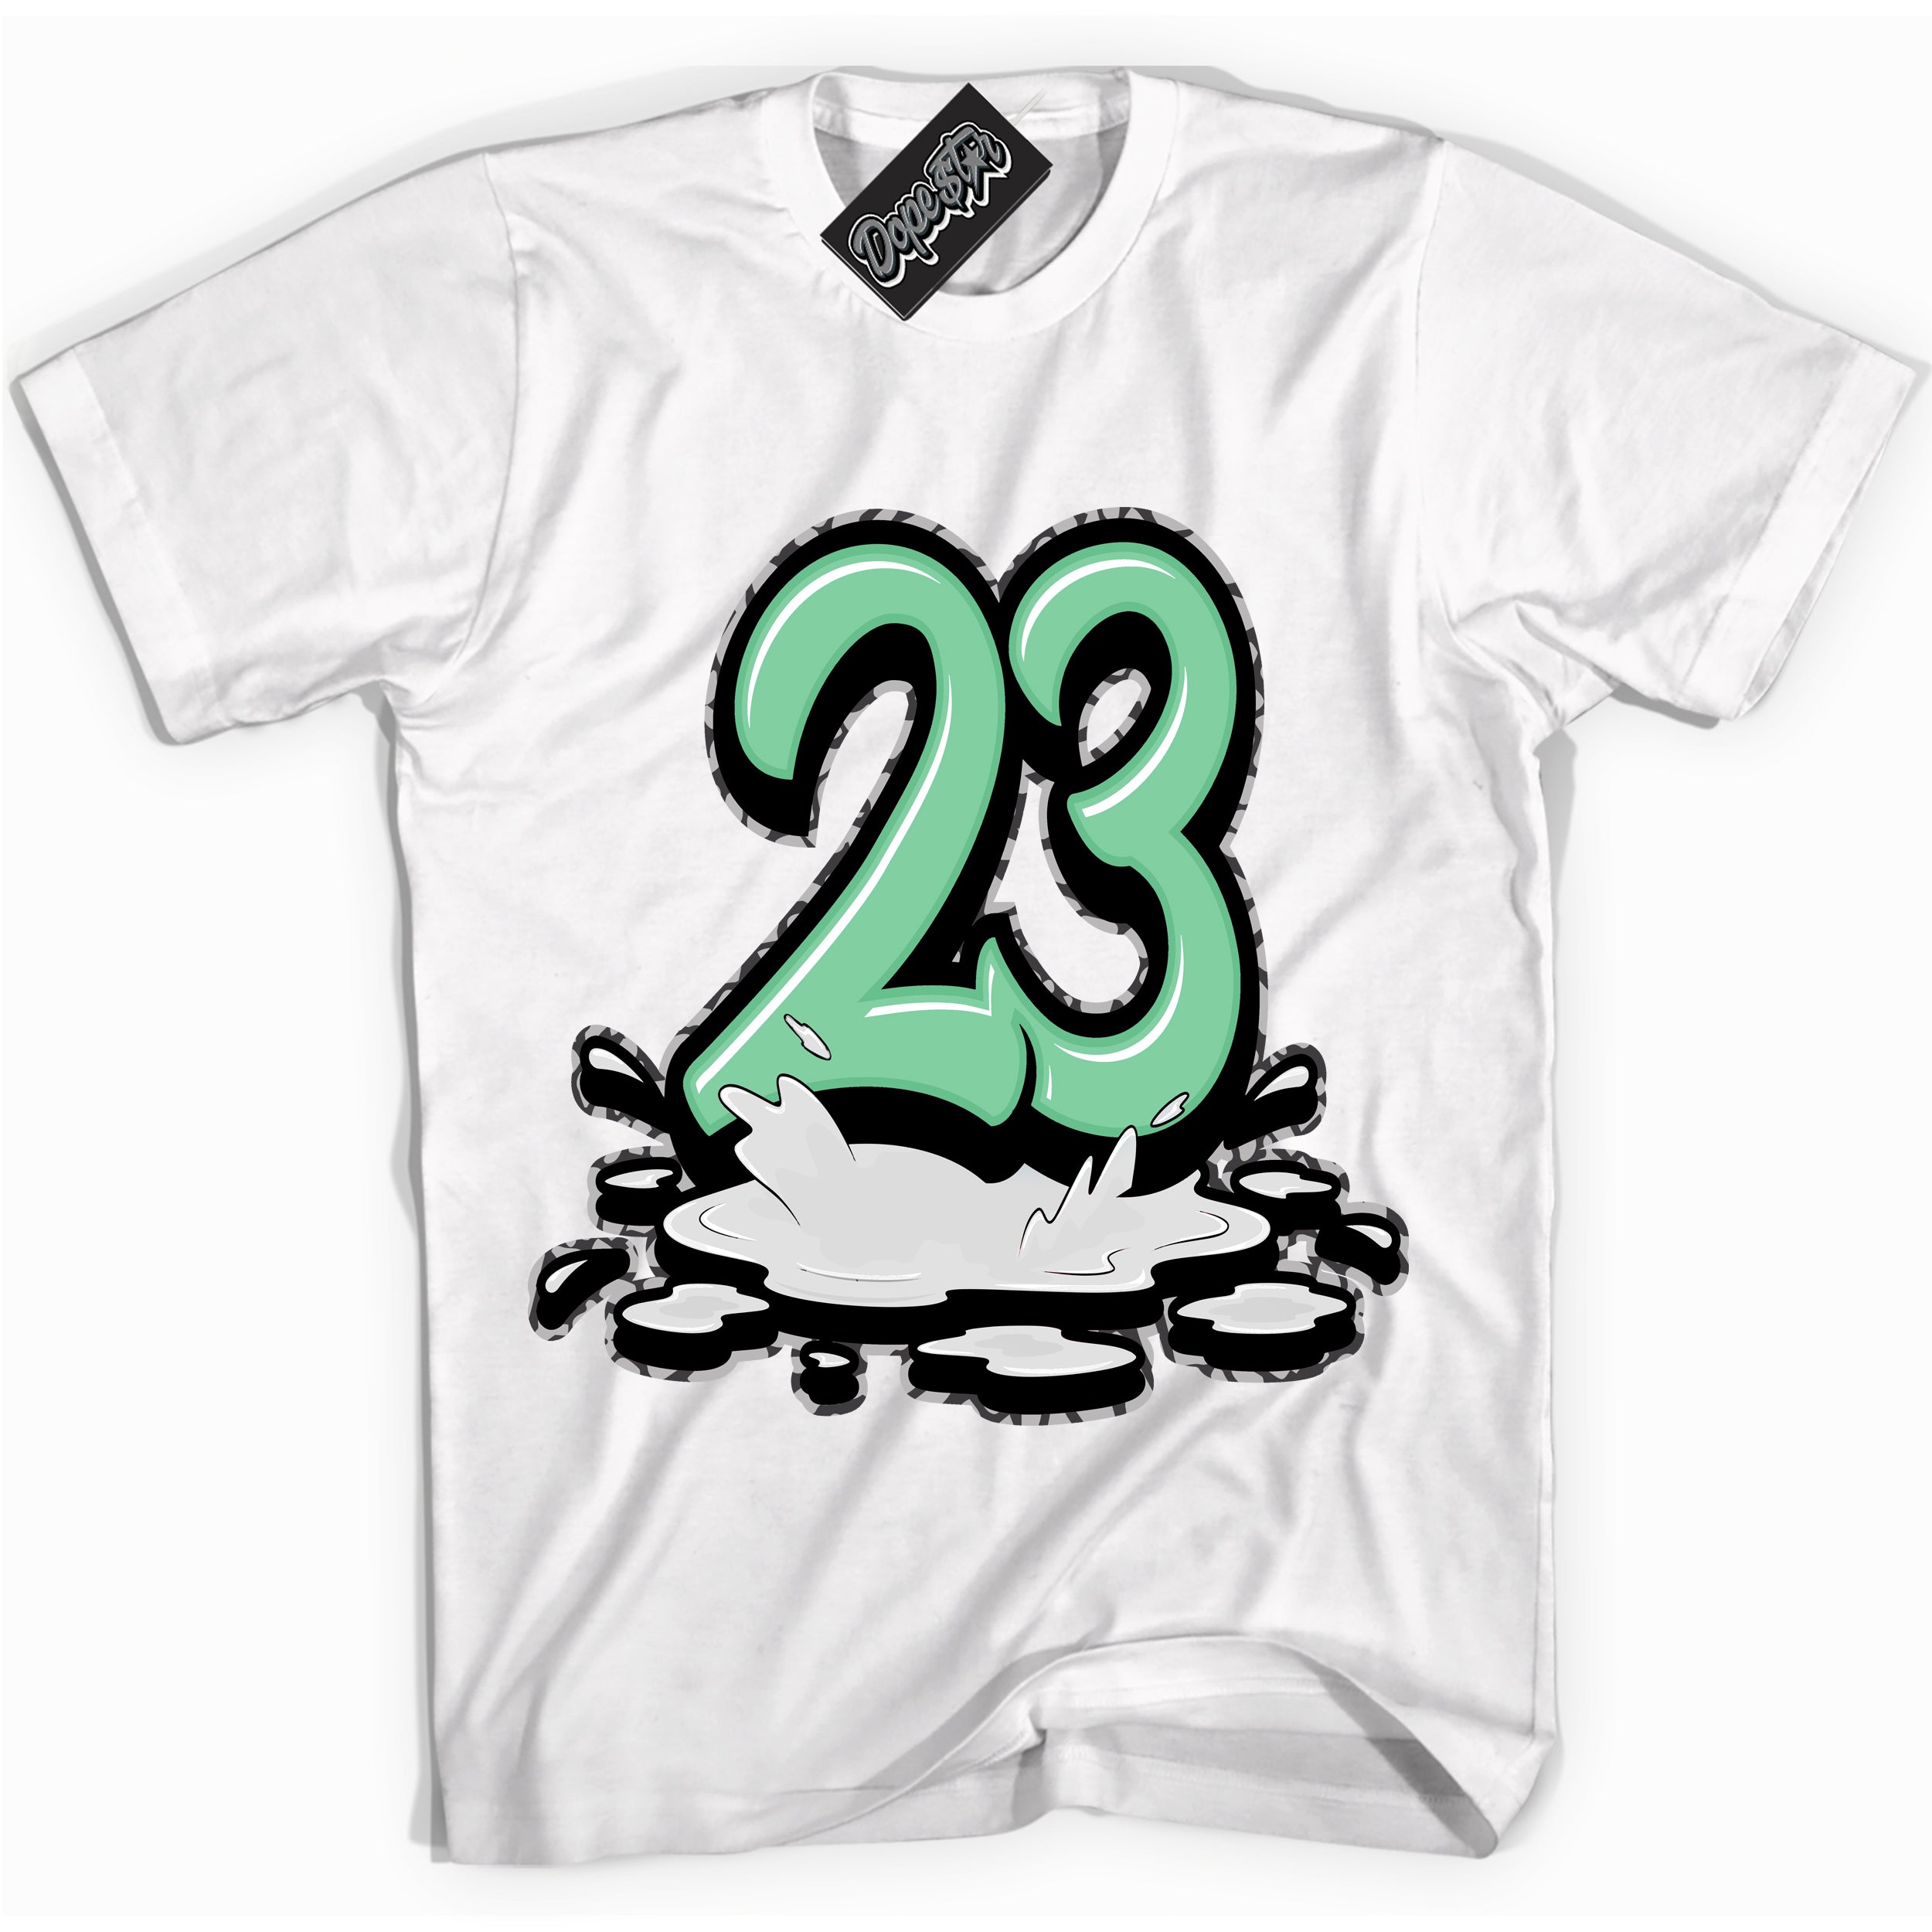 Cool White graphic tee with “ 23 Melting ” design, that perfectly matches Green Glow 3s sneakers 